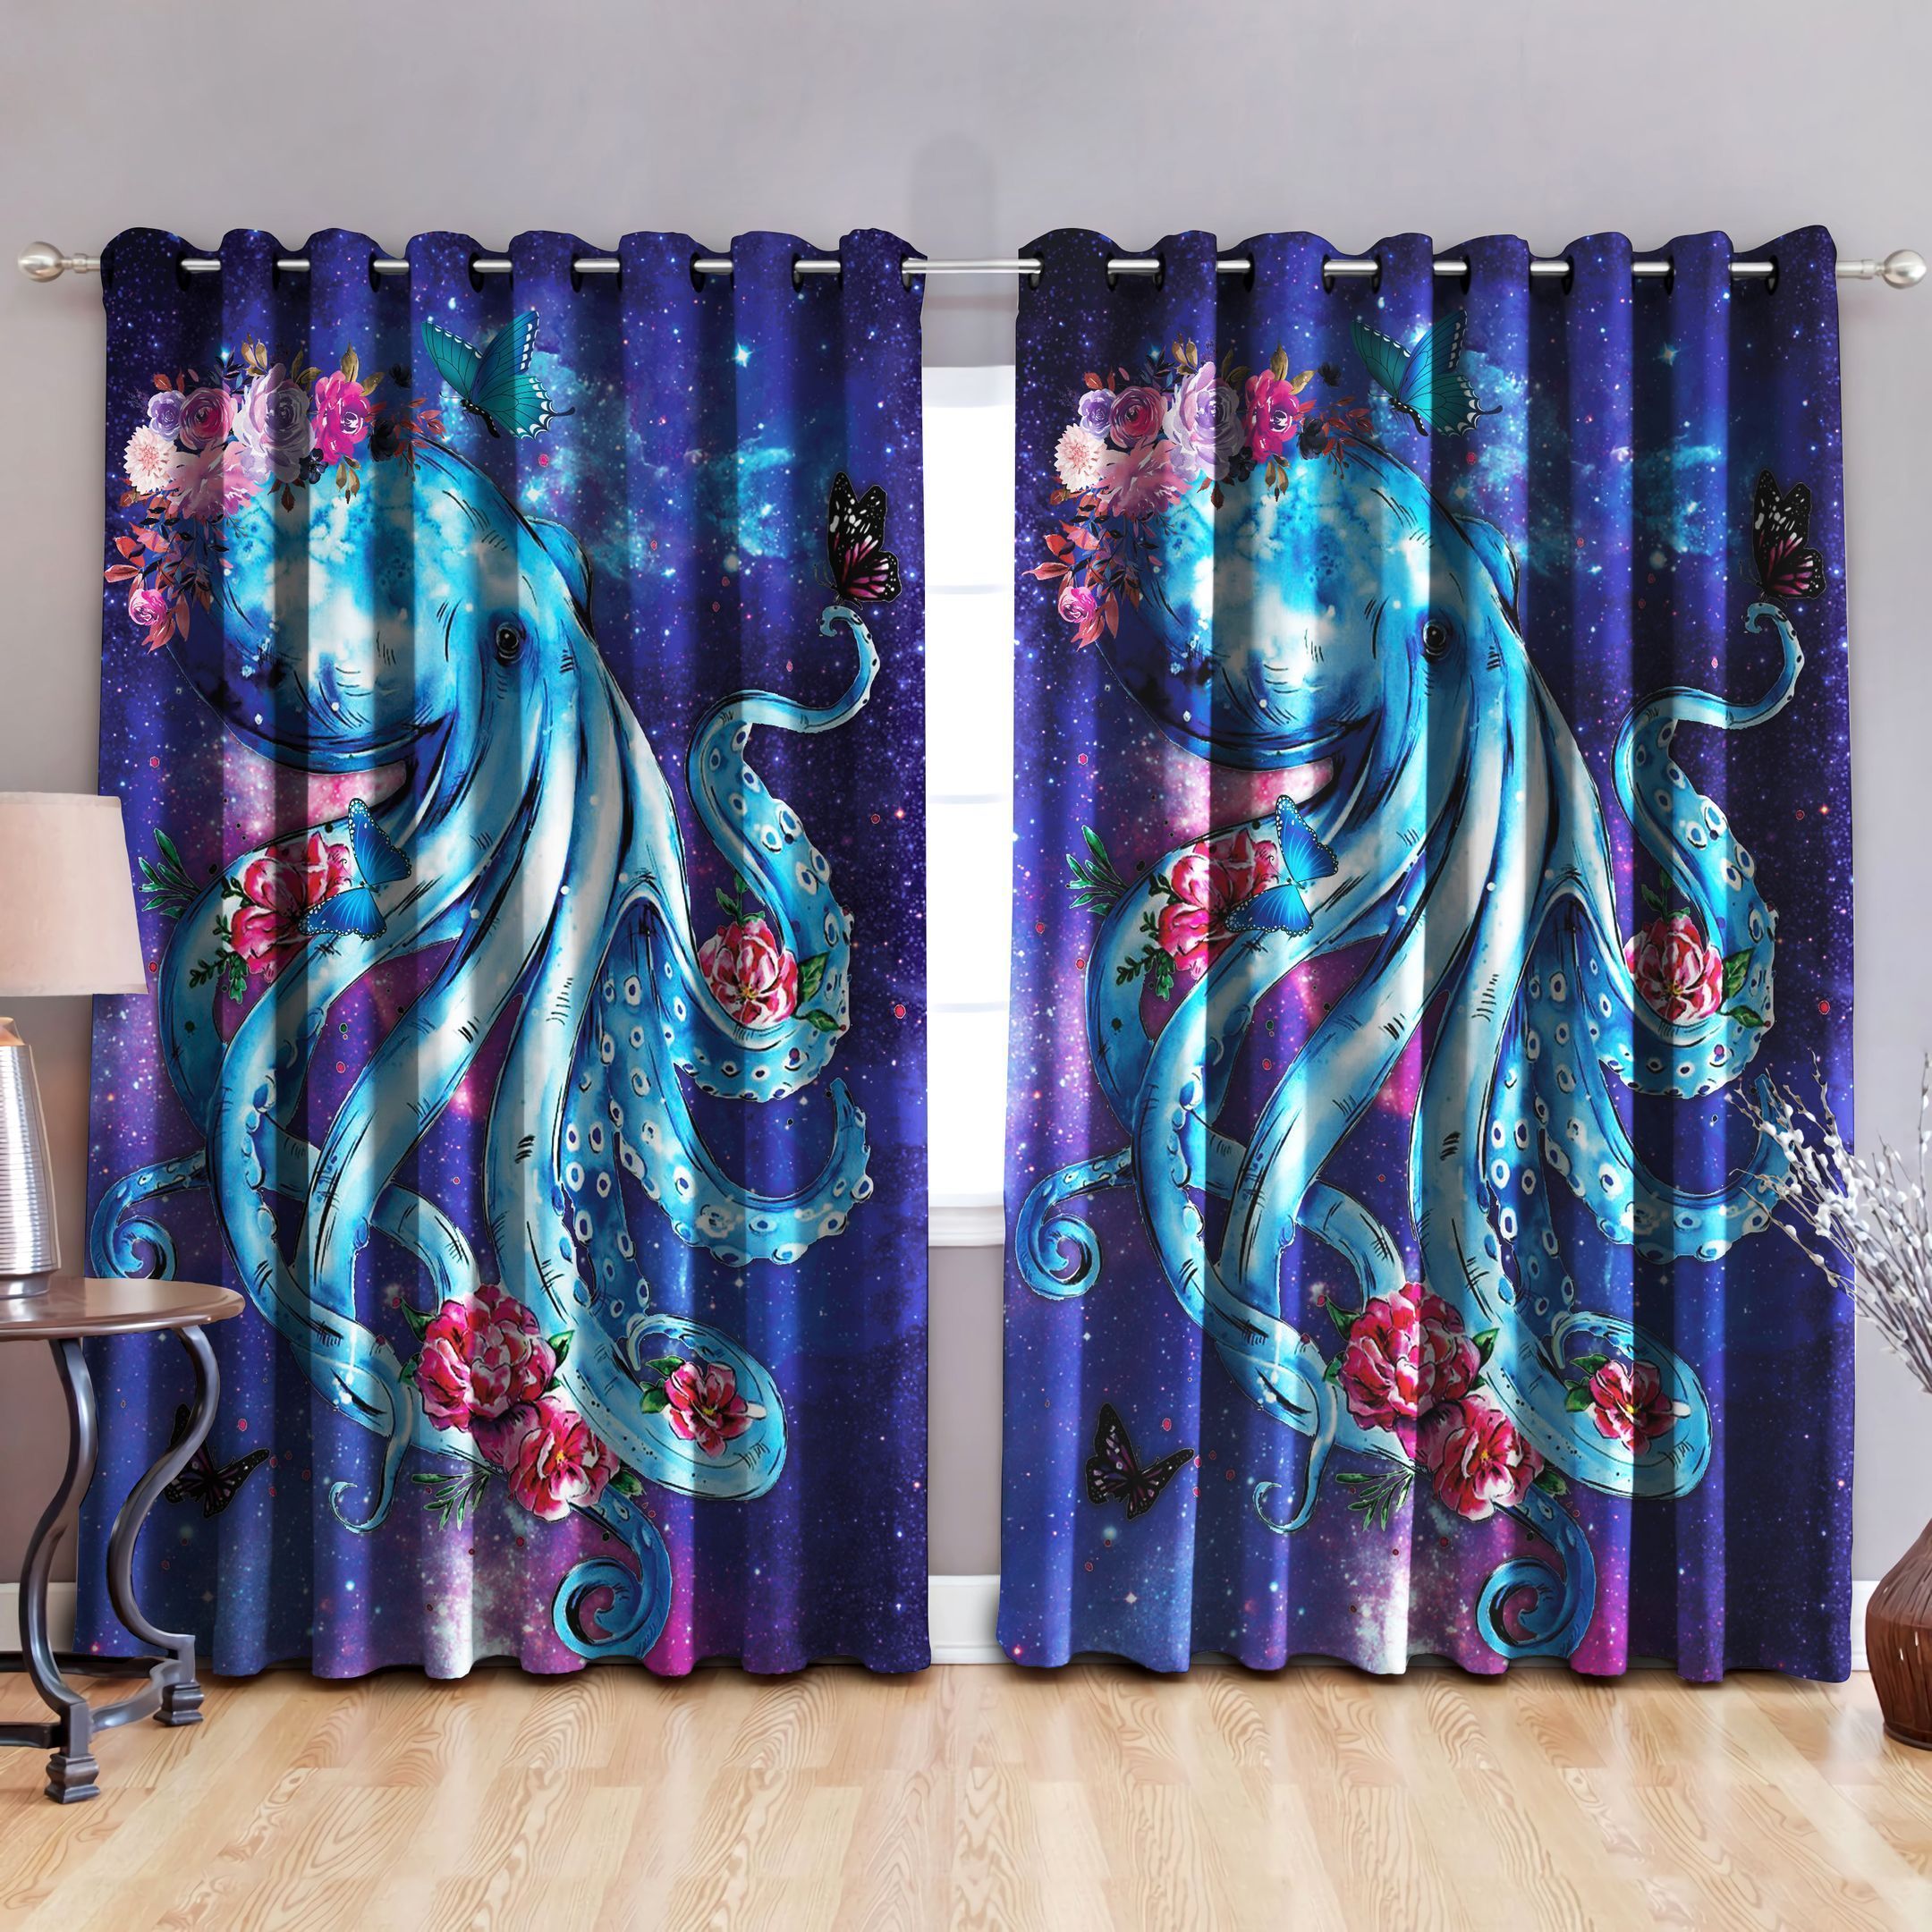 Blue Octopus Printed Window Curtains Home Decor